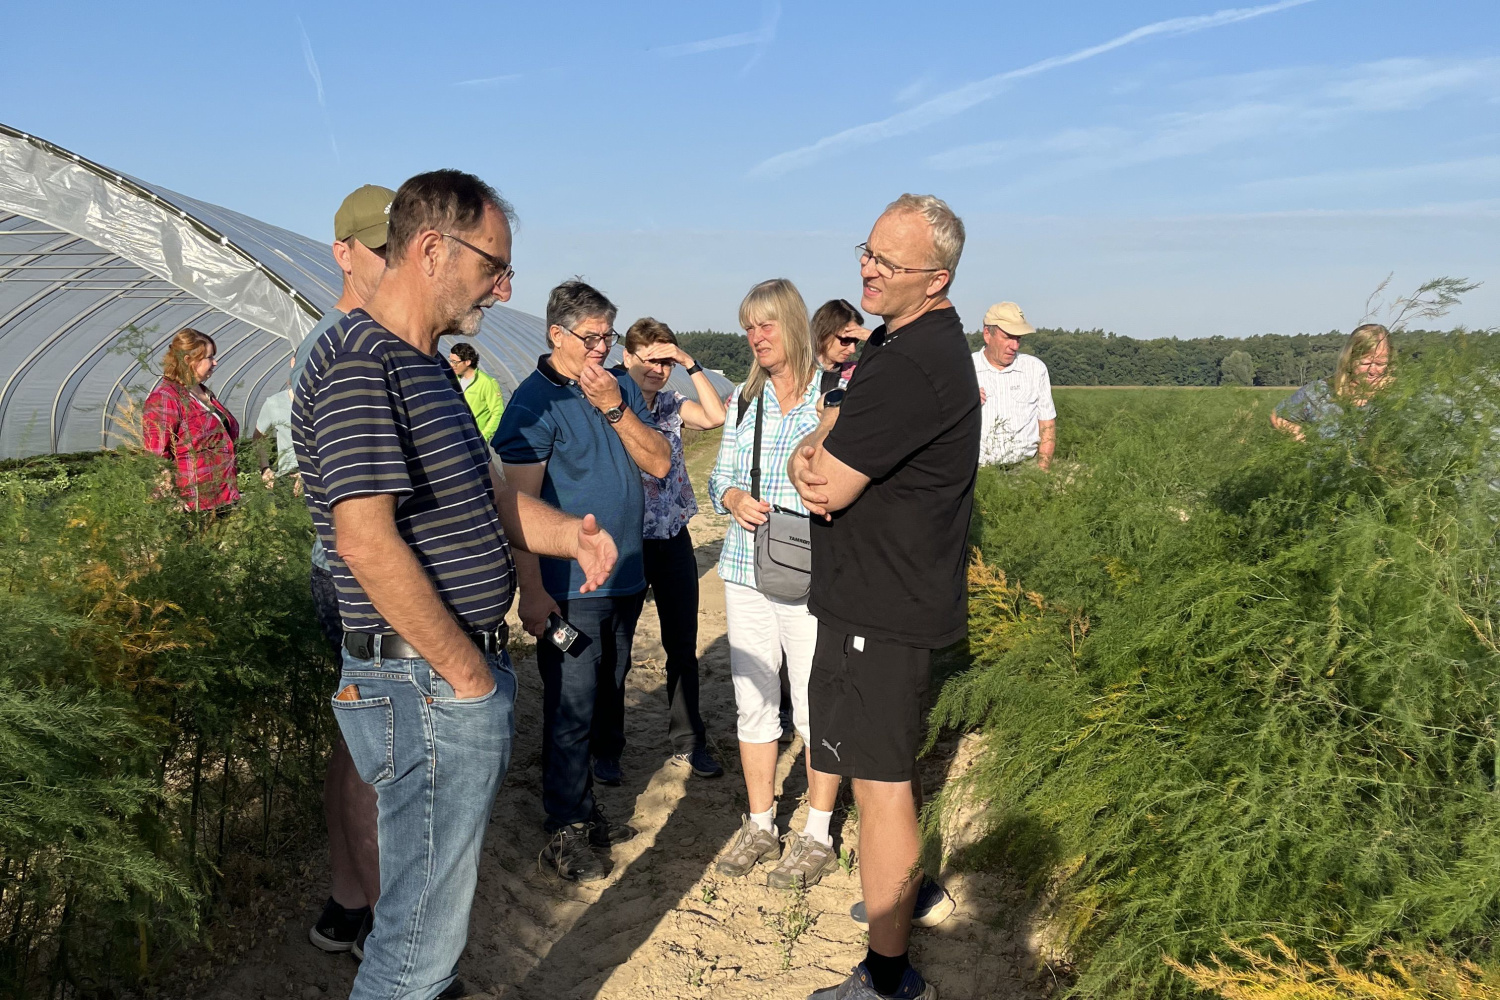 Several people standing, talking, in an asparagus field.